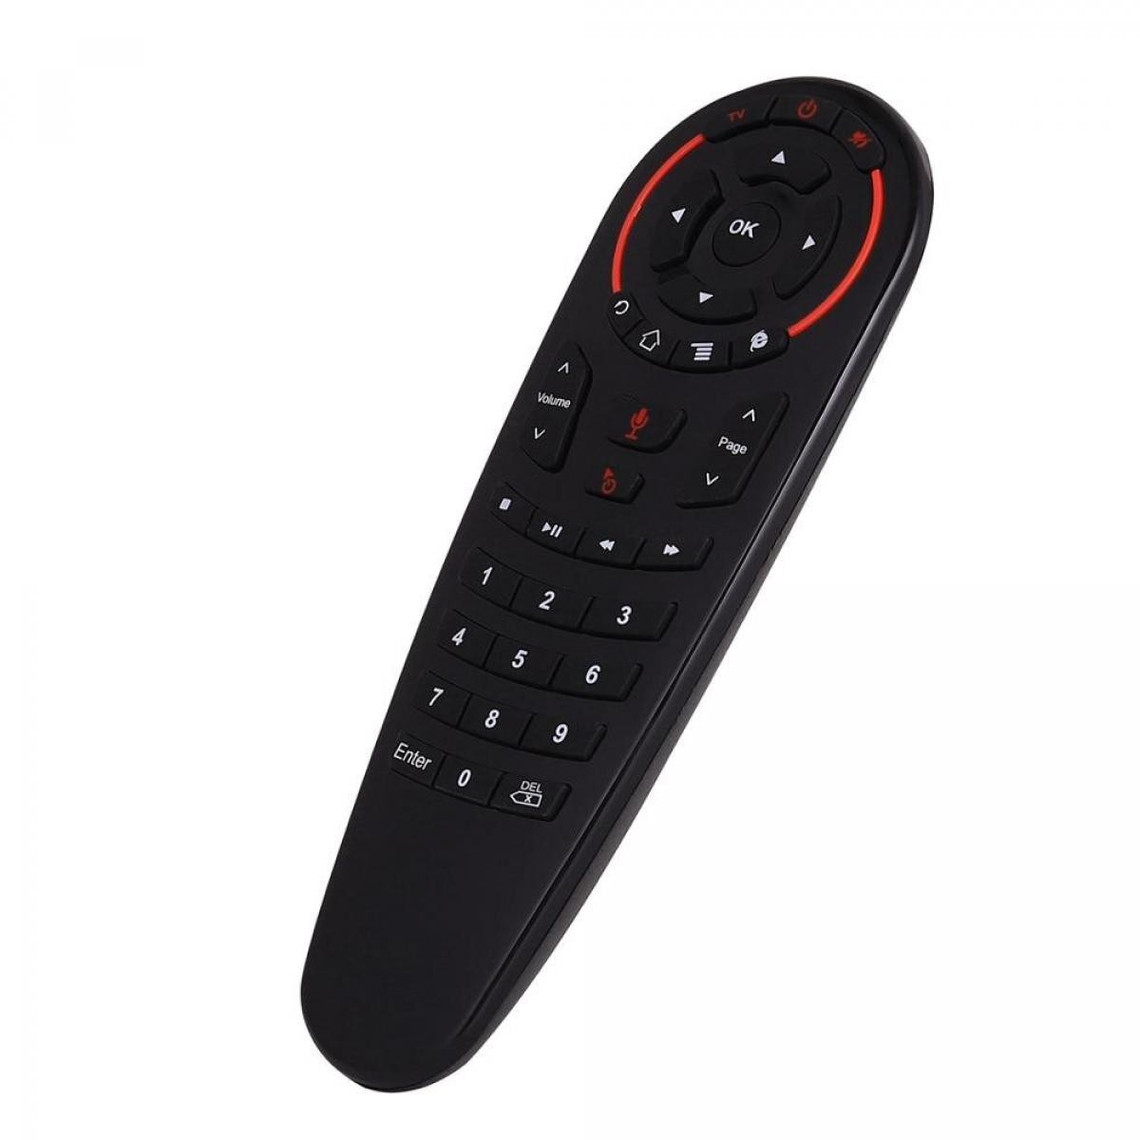 Telecommande Universelle Universal Air Mouse Slogan Sound Control Remote 2.4G Wireless 33 Touches IR Learning Gyro Induction Smart Remote pour Android TV Box X96 Mini H96 | Télécommande